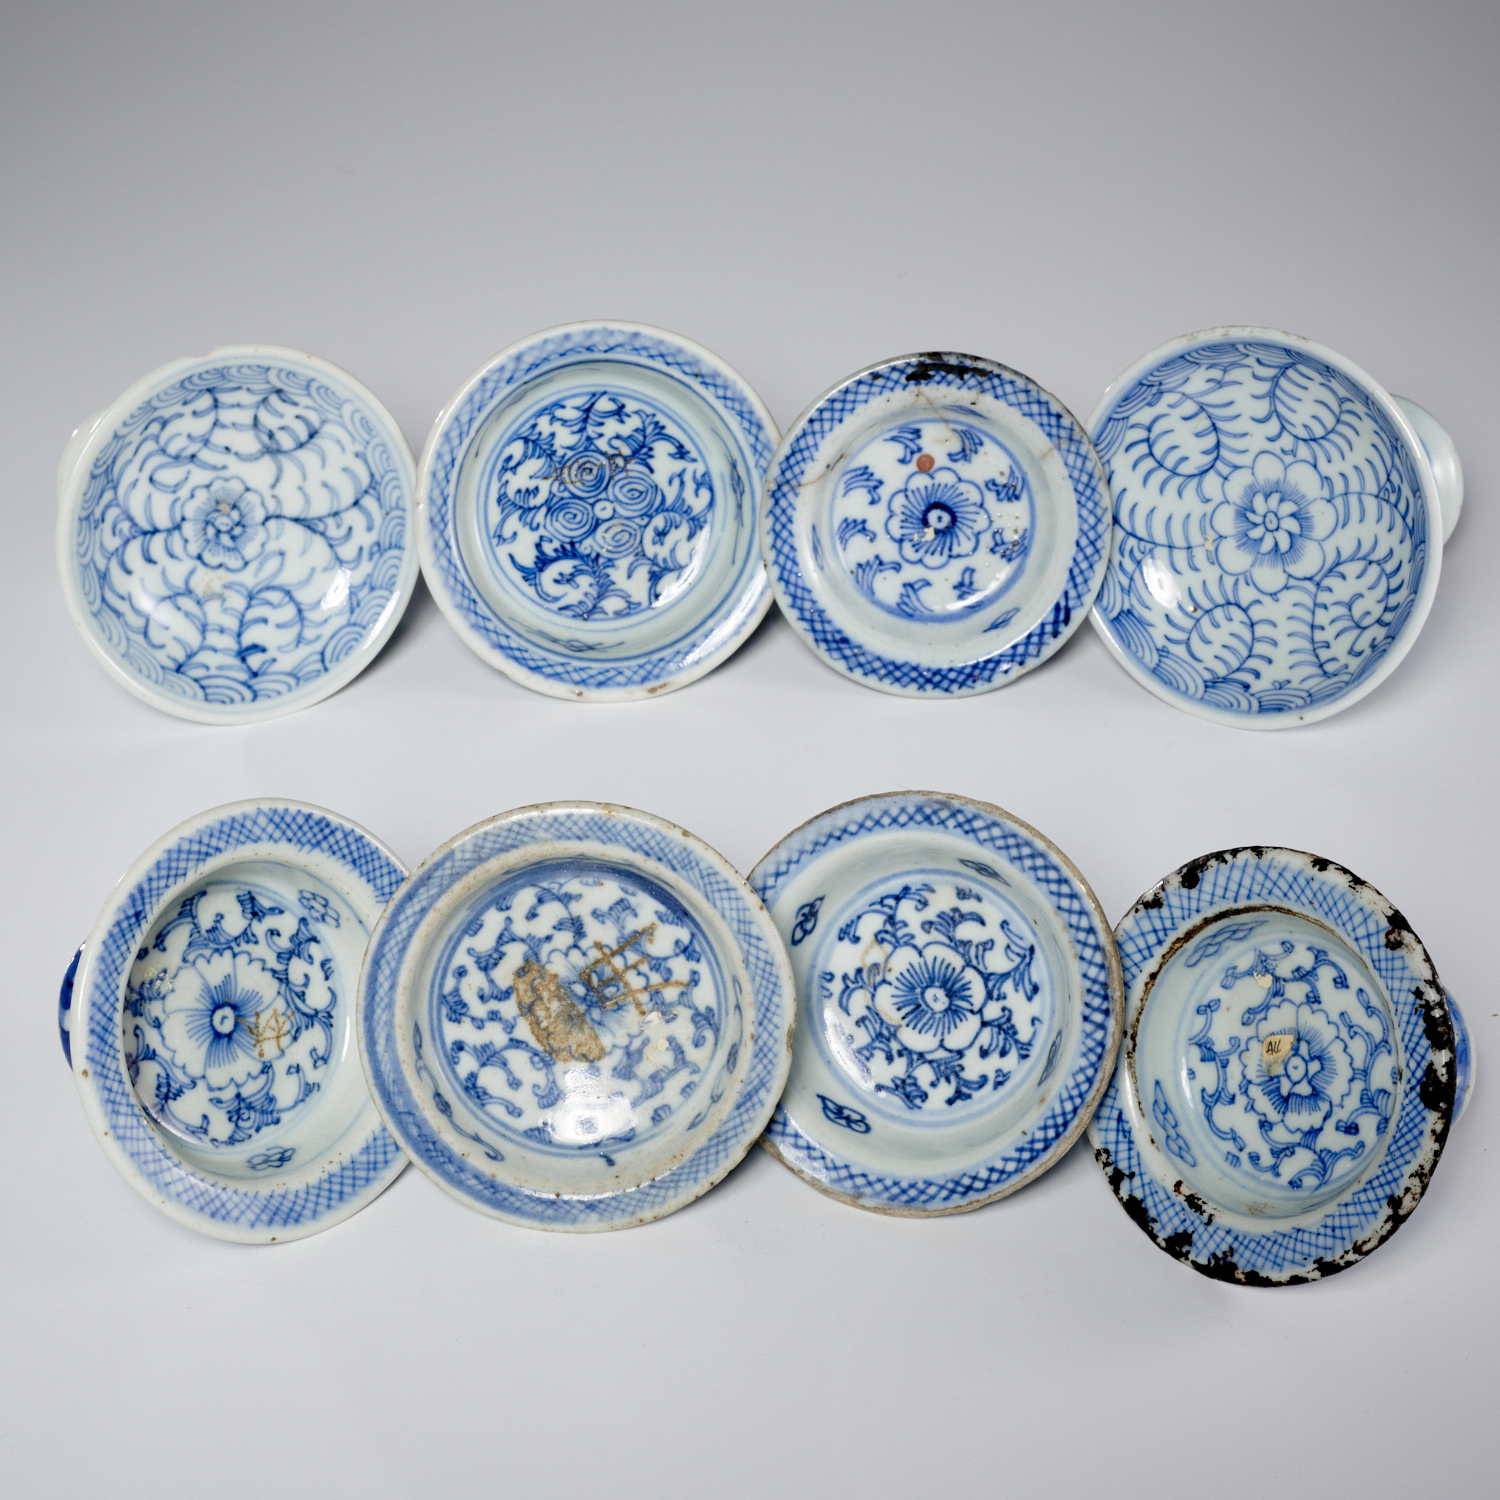 (8) CHINESE BLUE AND WHITE PORCELAIN